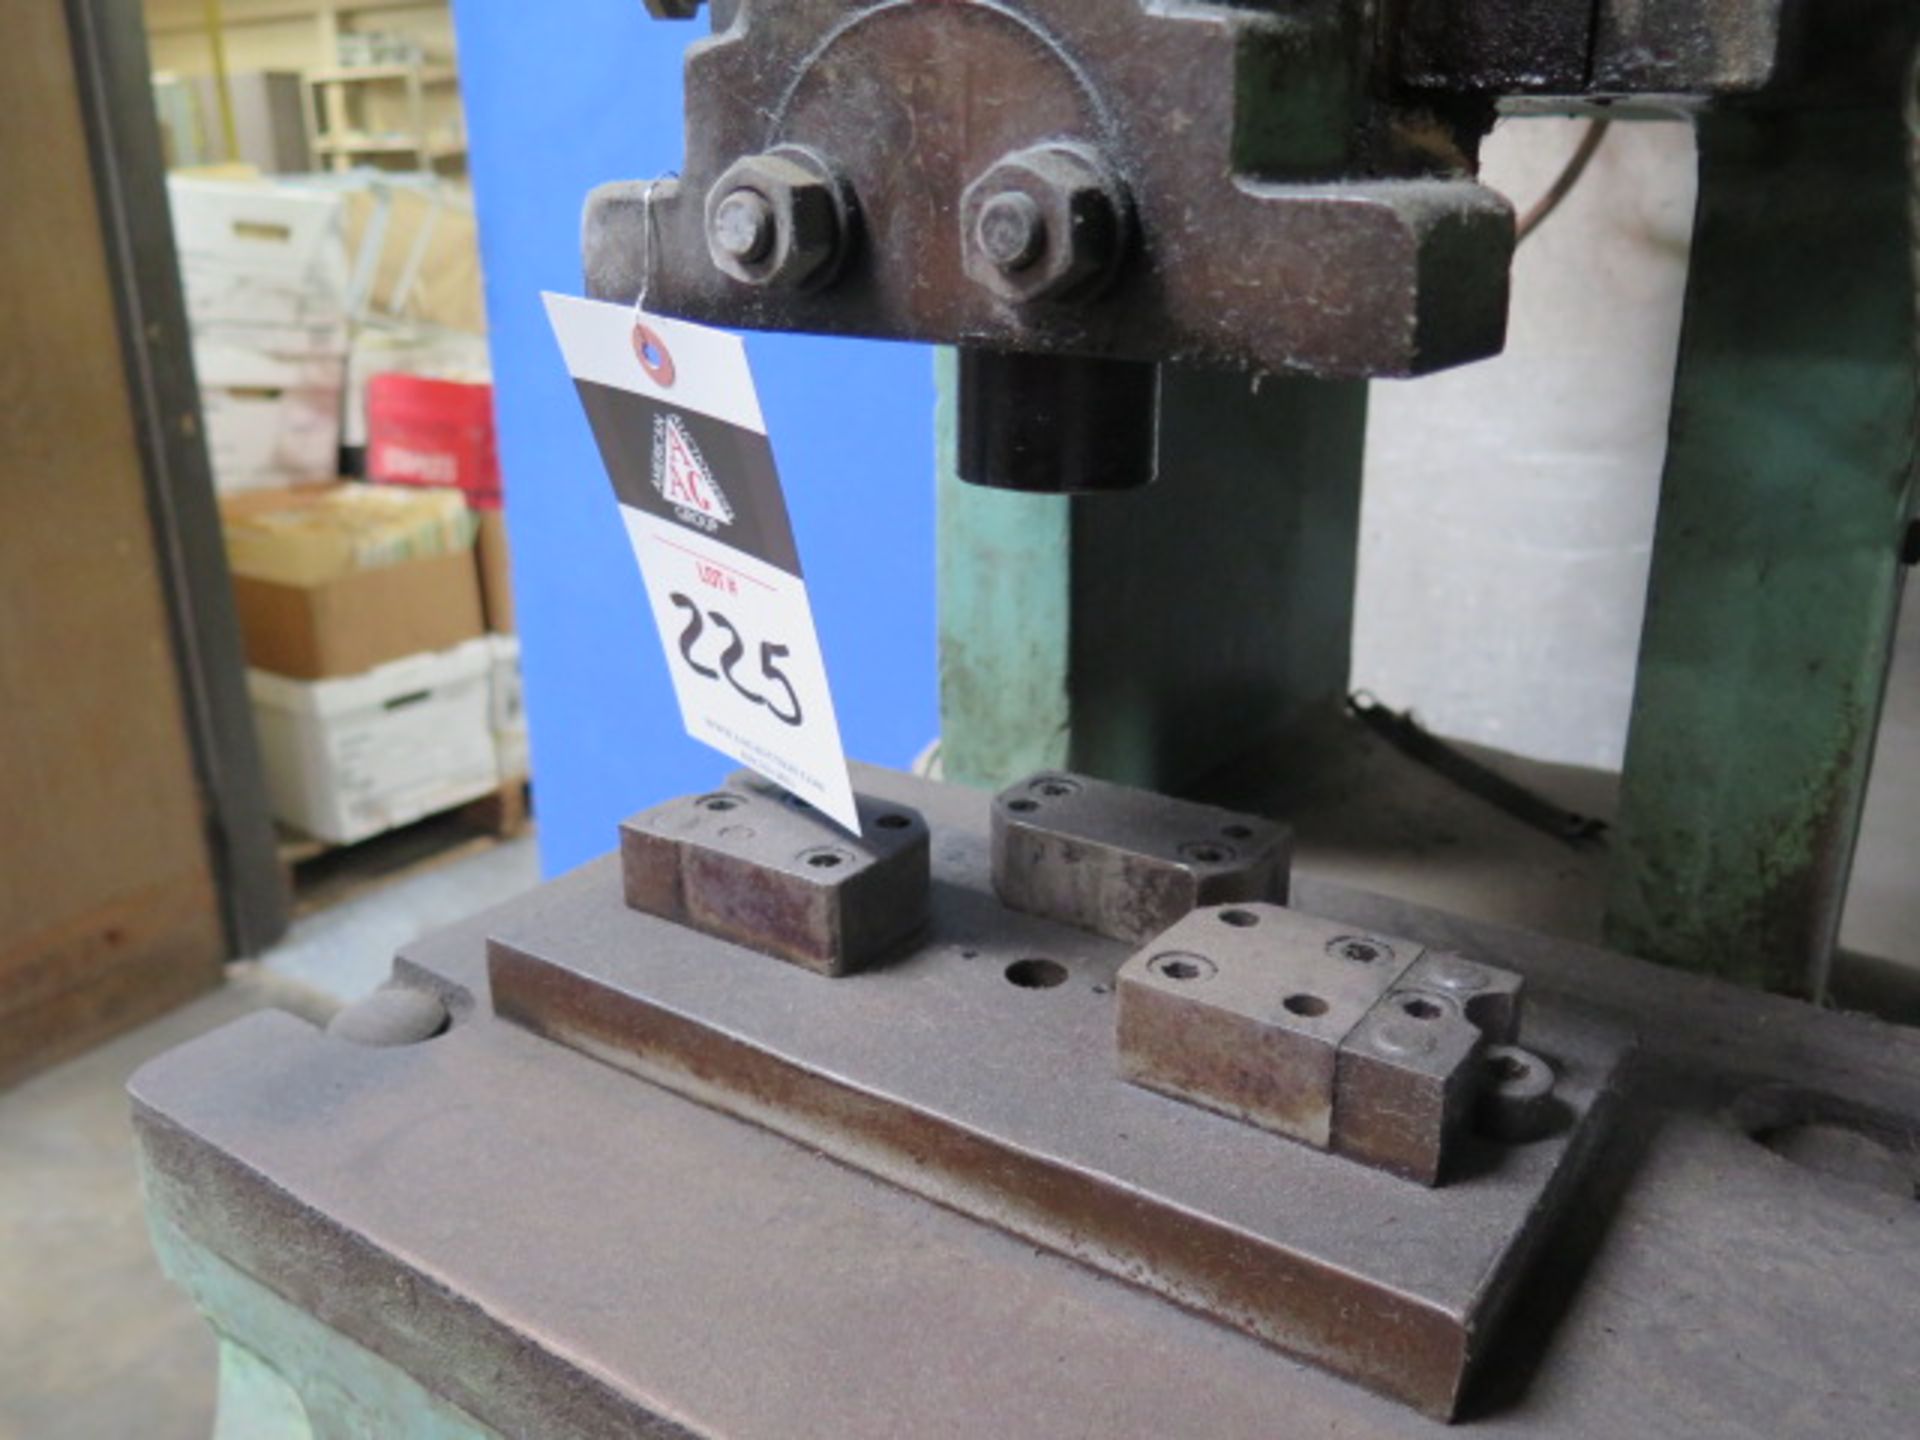 Bench Master mdl. 253 OBI Stamping Press w/ 11” x 15” Bolster Area (SOLD AS-IS - NO WARRANTY) - Image 4 of 6